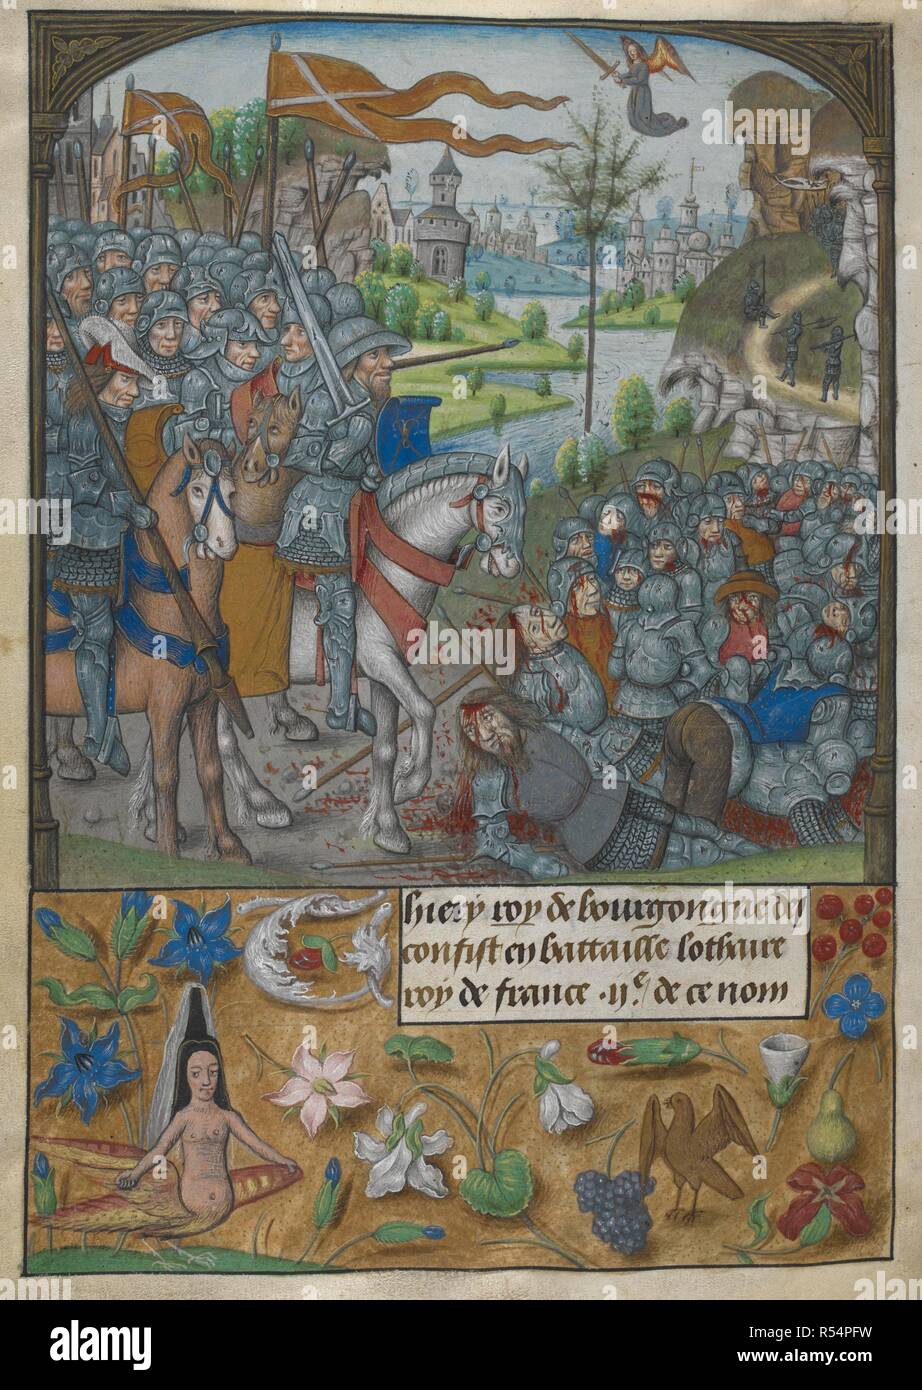 Whole Folio Battle Scene Probably A Reference The The Battle Of A Tamps In 604 In Which Thierry King Of Burgundy Defeated Lothaire King Of France Thierry On A White Horse Contemplates The